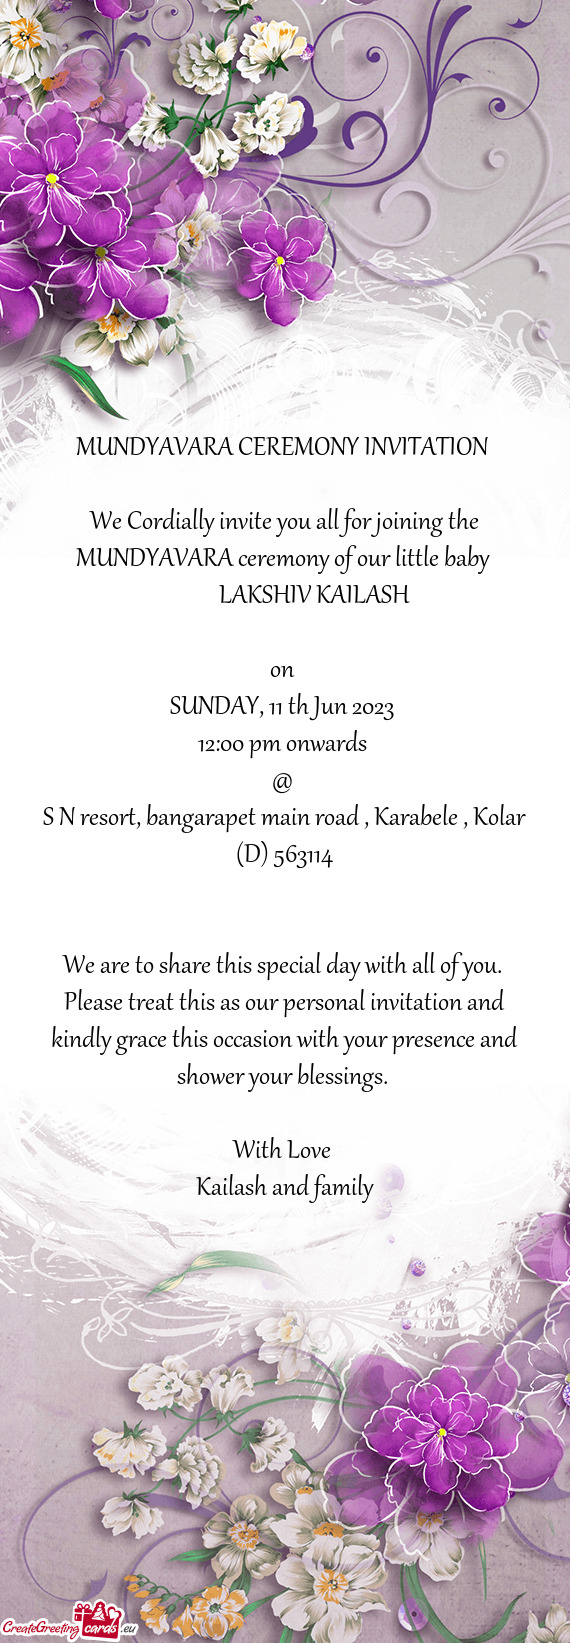 We Cordially invite you all for joining the MUNDYAVARA ceremony of our little baby